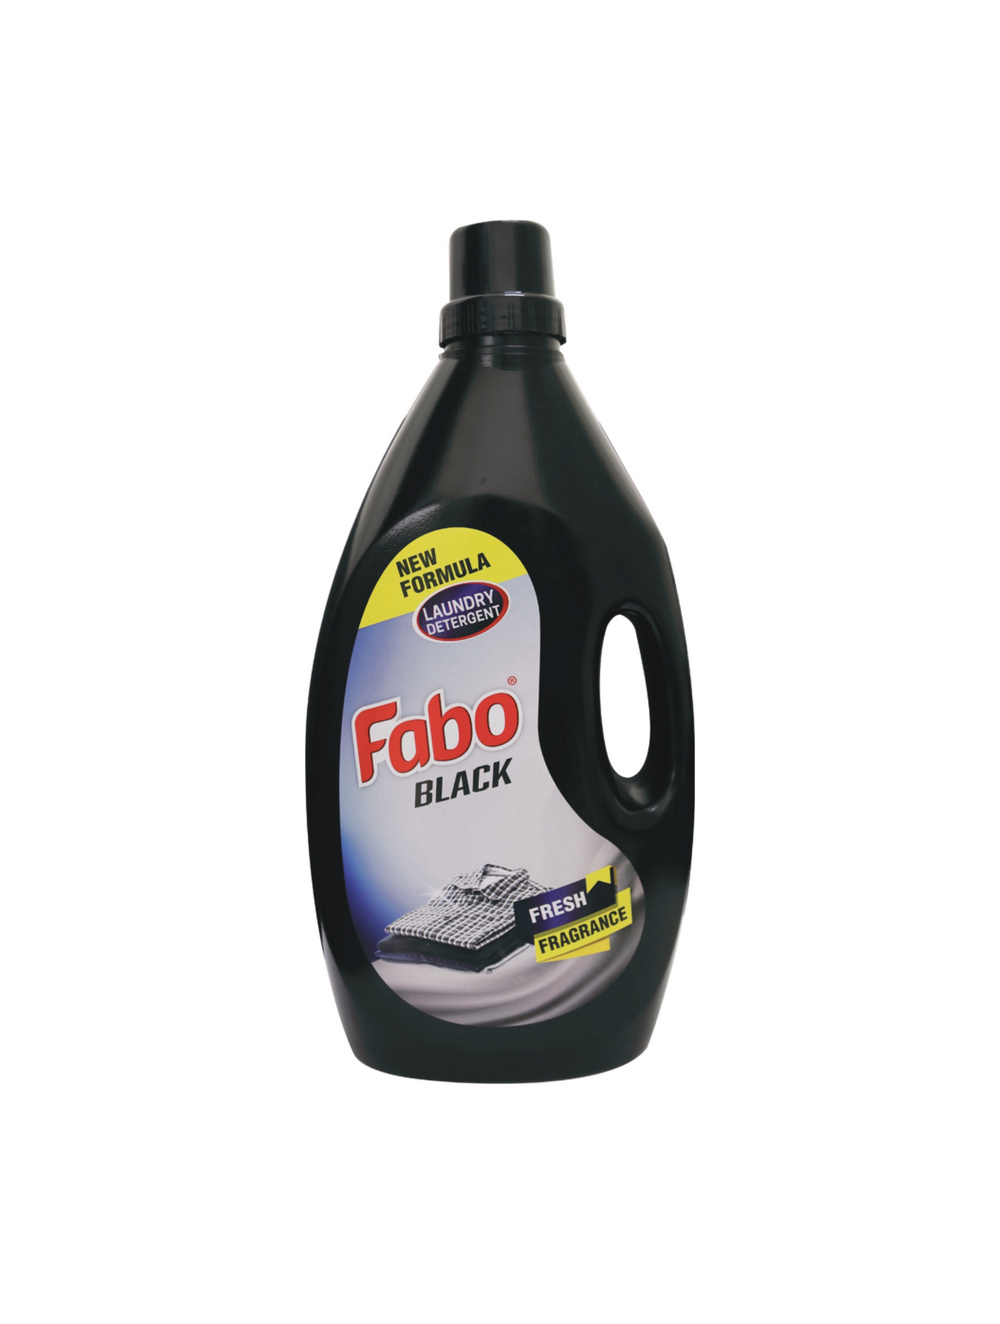 fabo-products_page-0045